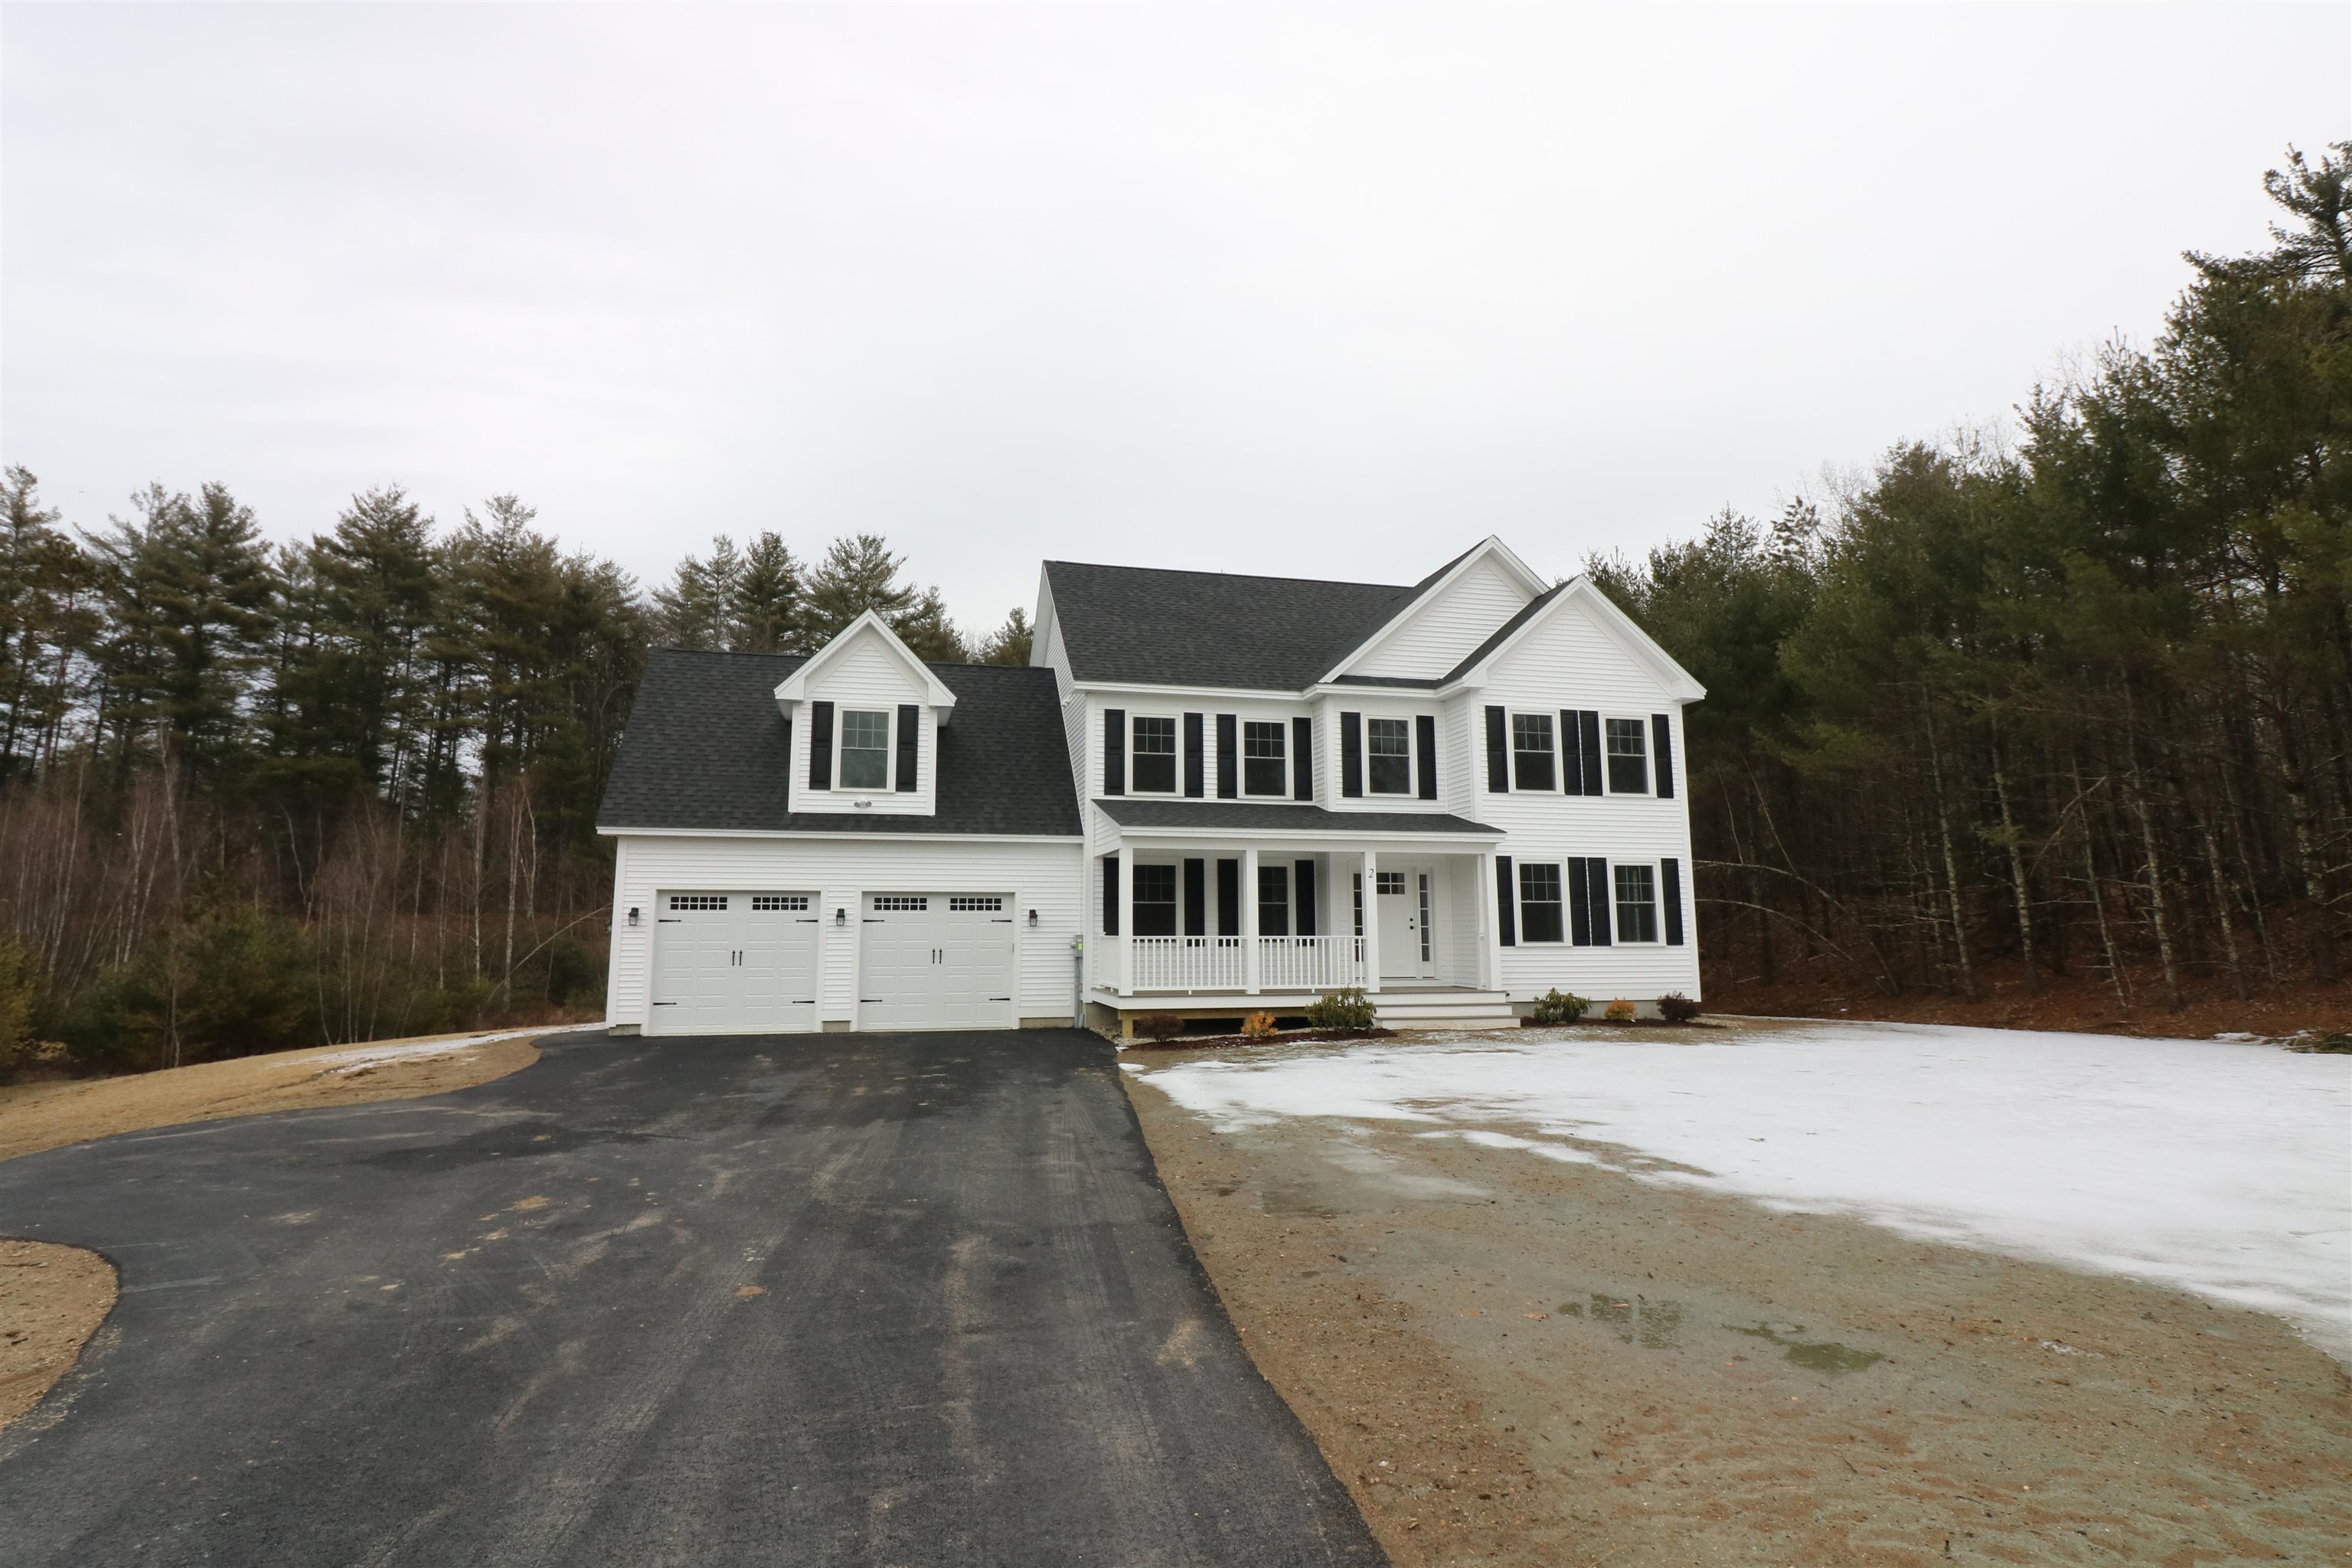 Lot 10 Woodland Hollow Road, Lee, NH 03861